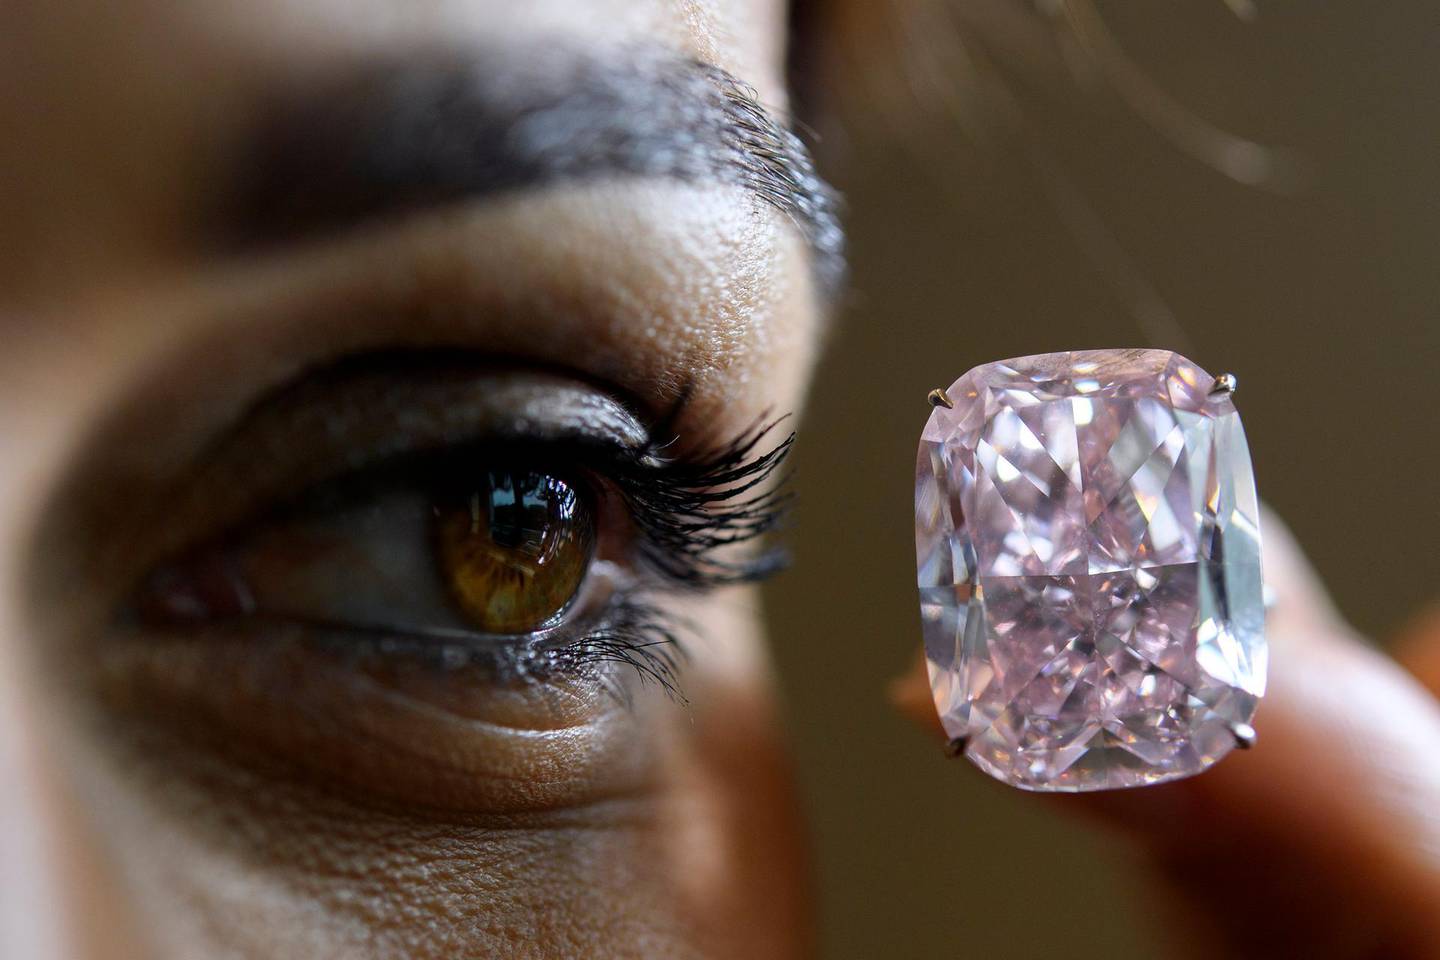 epa06315740 A Sotheby's employee shows 'The Raj Pink', a 37.30-carat pink diamond, which is estimated to sell between 20,000,000 to 30,000,000 US dollar, during a preview at the Sotheby's in Geneva, Switzerland, 08 November 2017. The auction will take place on 15 November.  EPA/MARTIAL TREZZINI